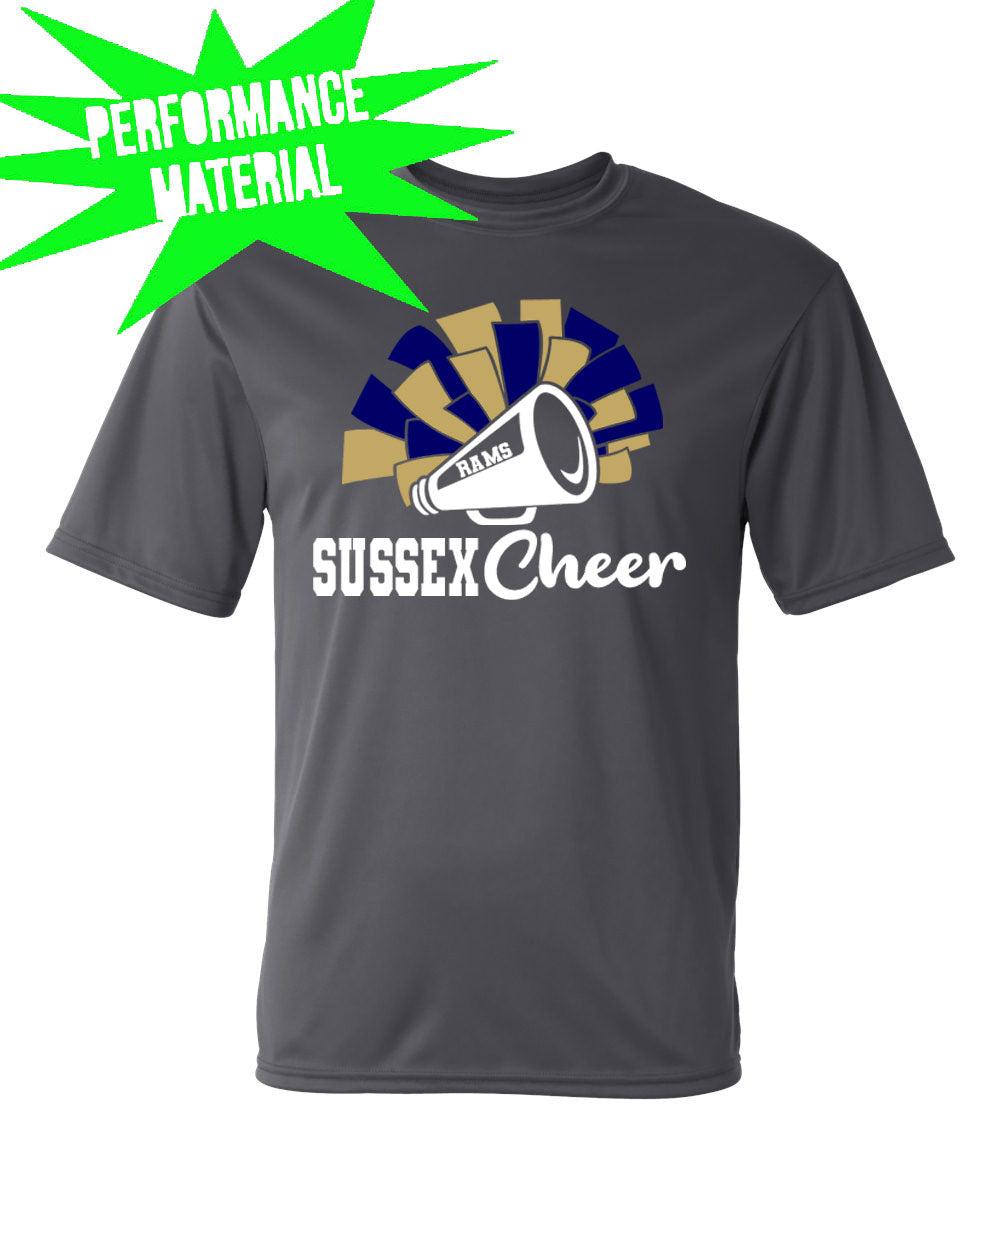 Sussex Middle Cheer Performance Material T-Shirt Design 2